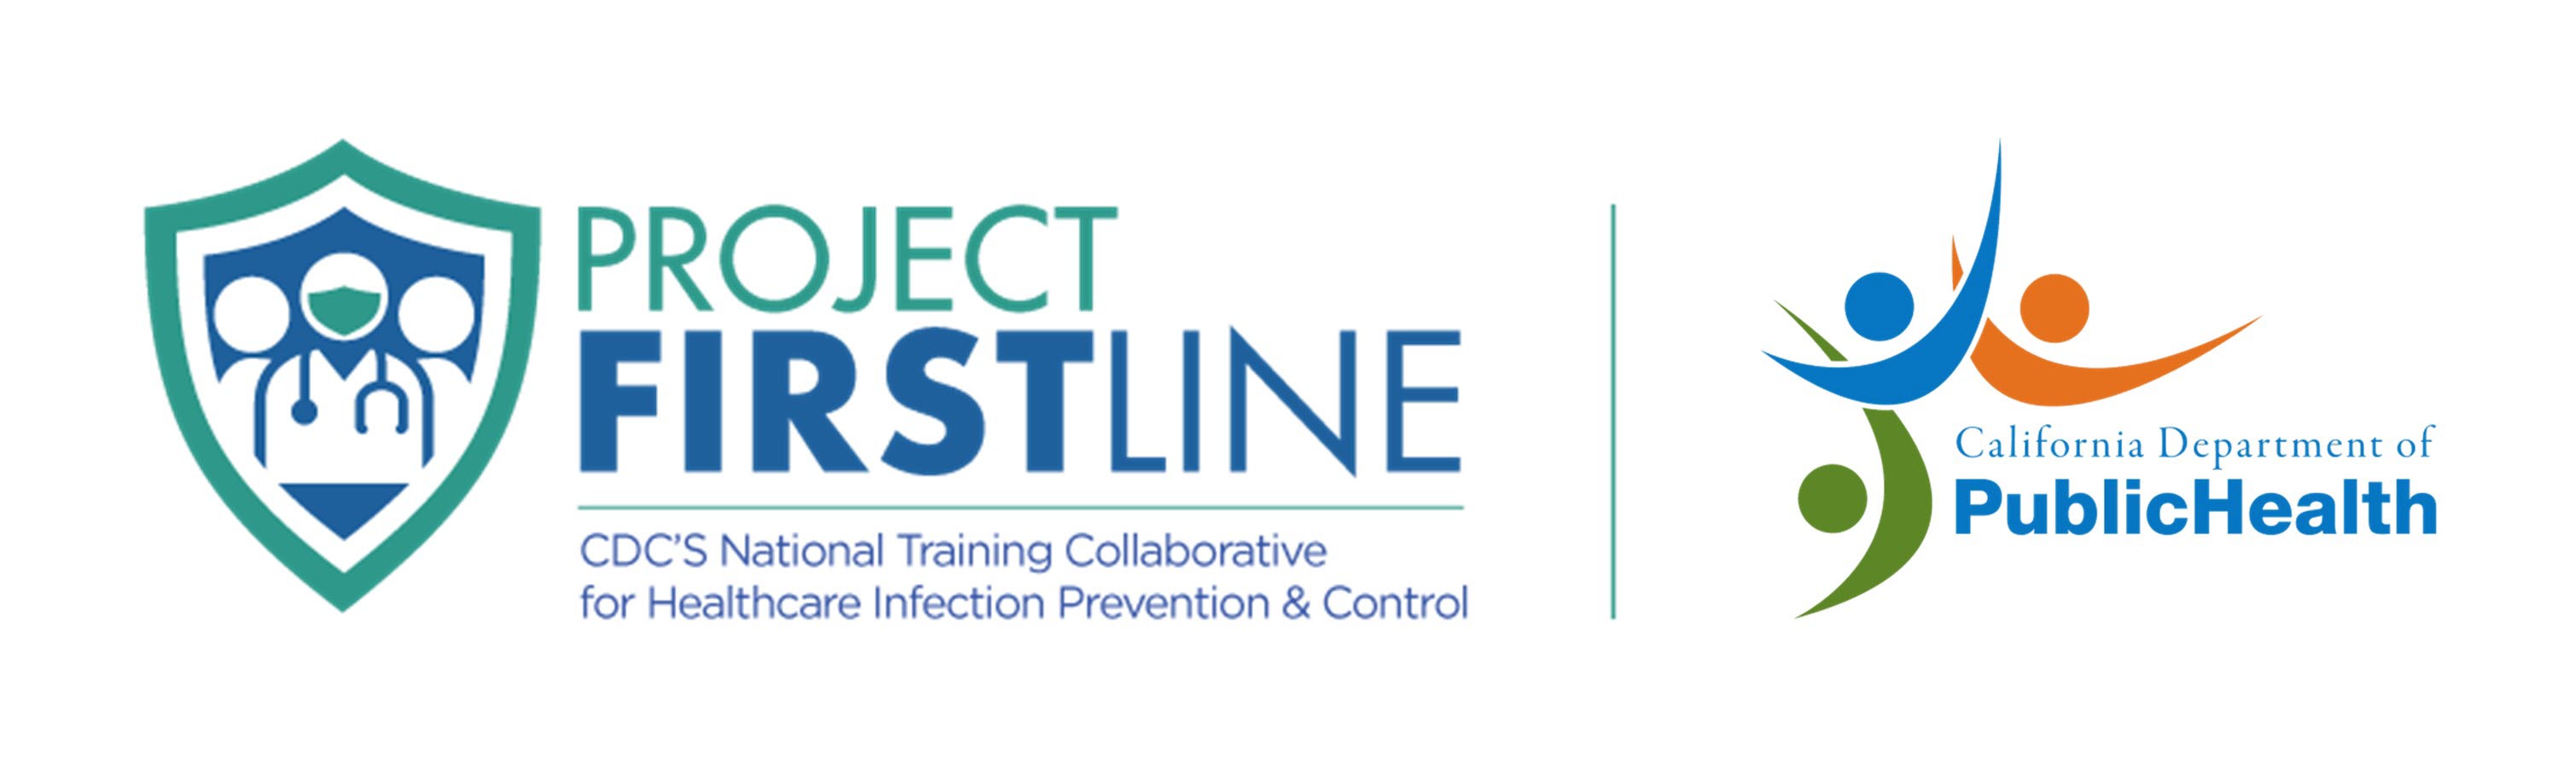 Project Firstline and CDPH logos